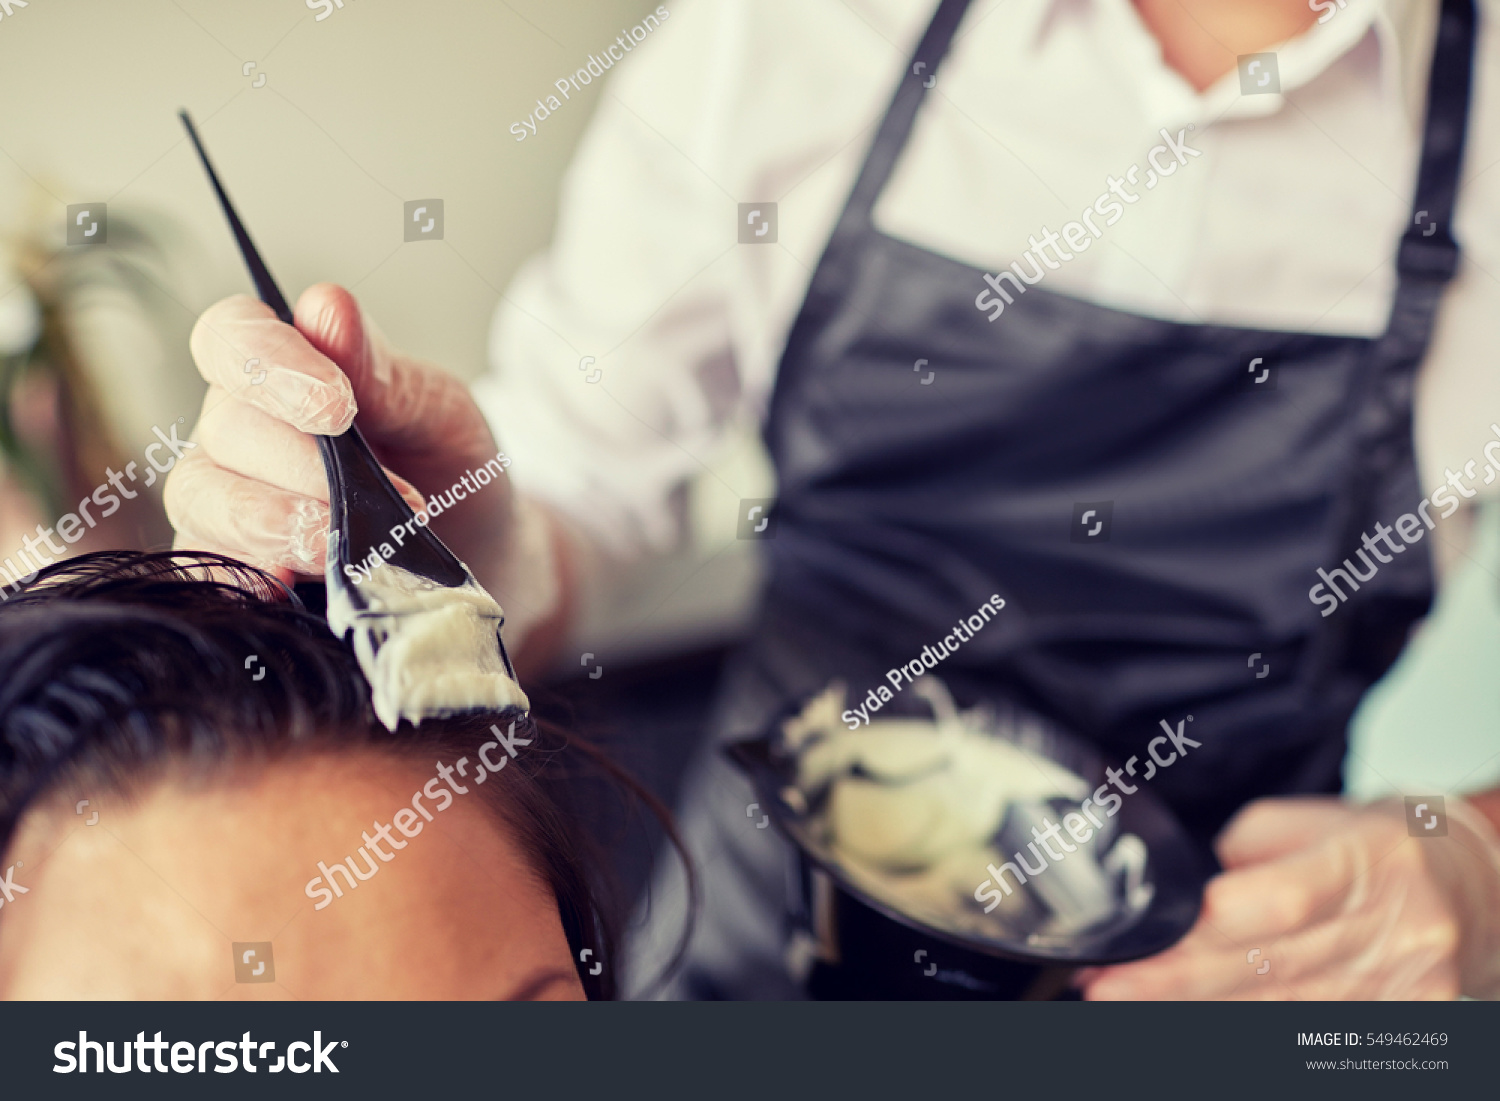 beauty and people concept - close up of stylist with hair dye and brush coloring hair at salon #549462469